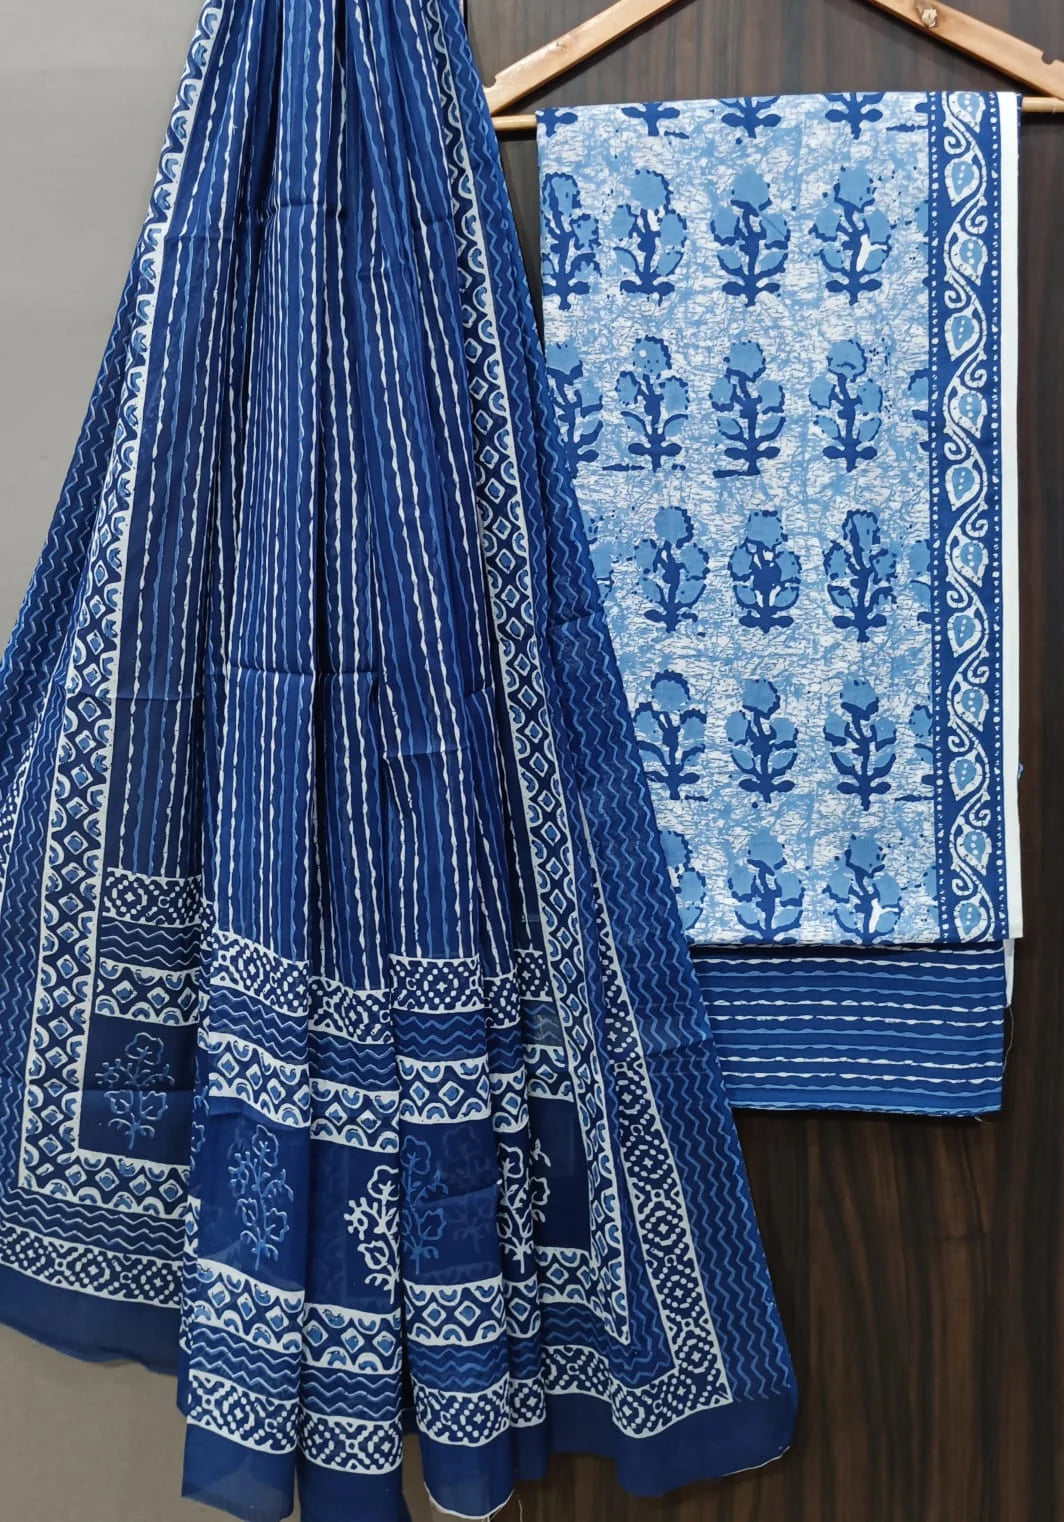 Screen Printed Unstitched Cotton Salwar Suit With Mulmul Dupatta